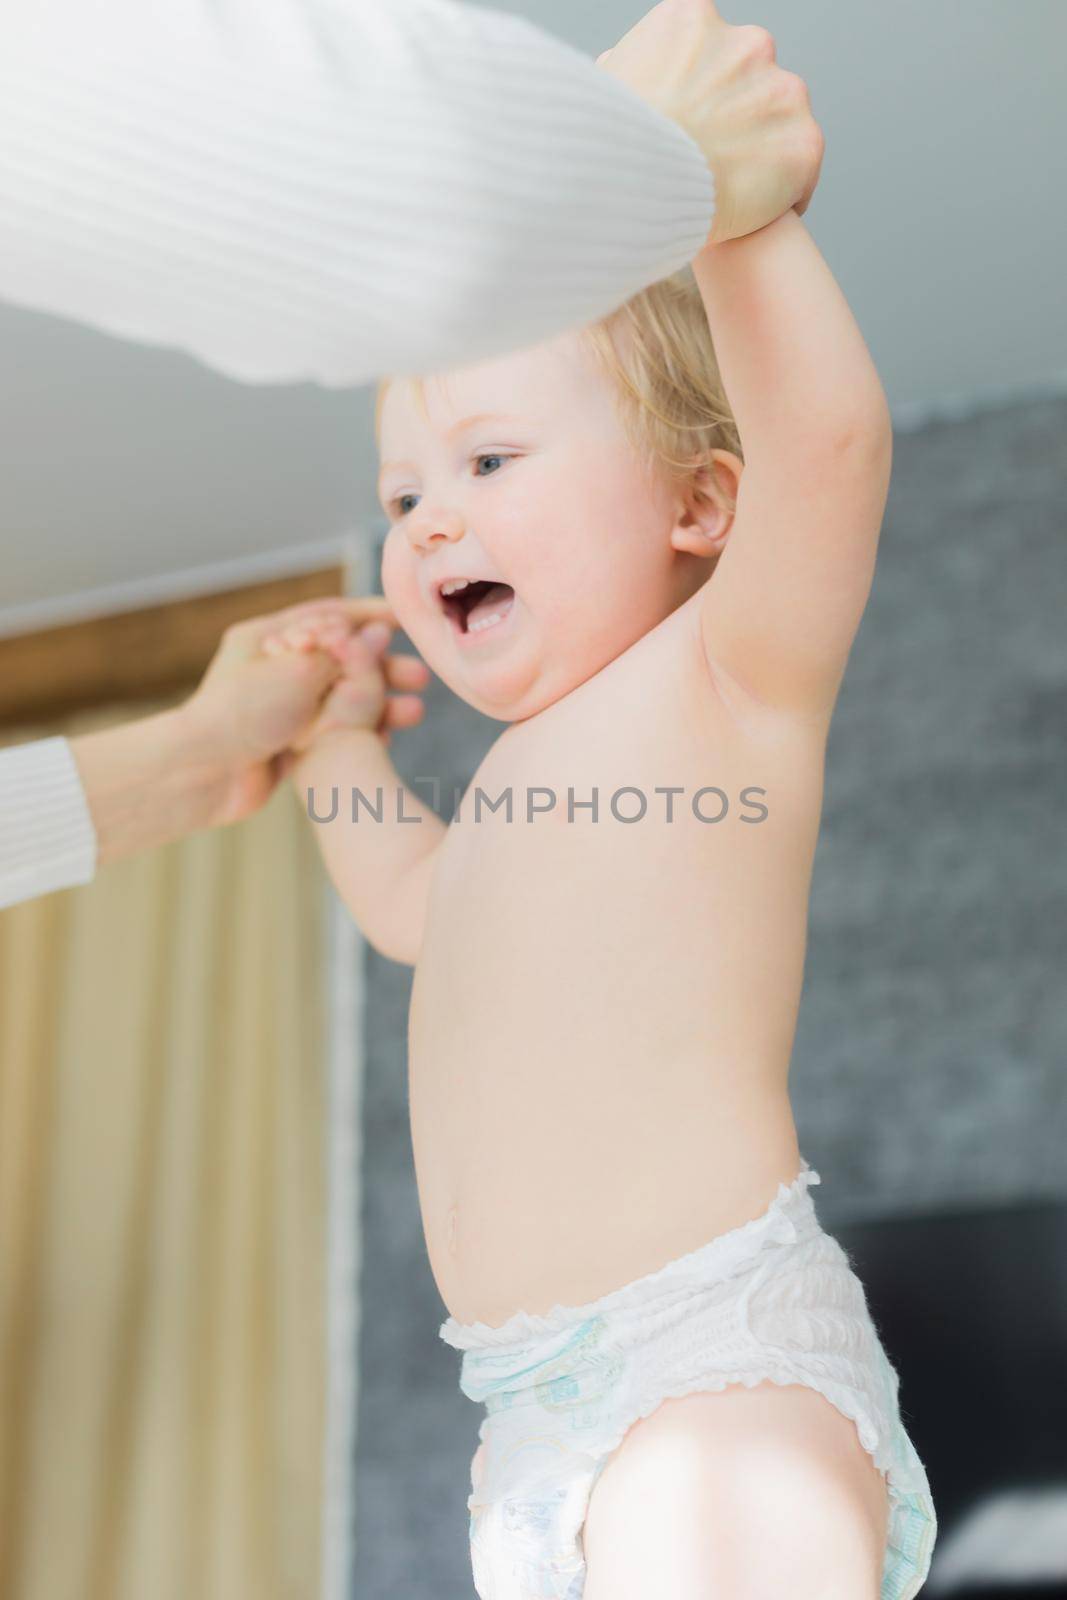 Mom does baby gymnastics for the baby's arms. Close-up. by Yurich32